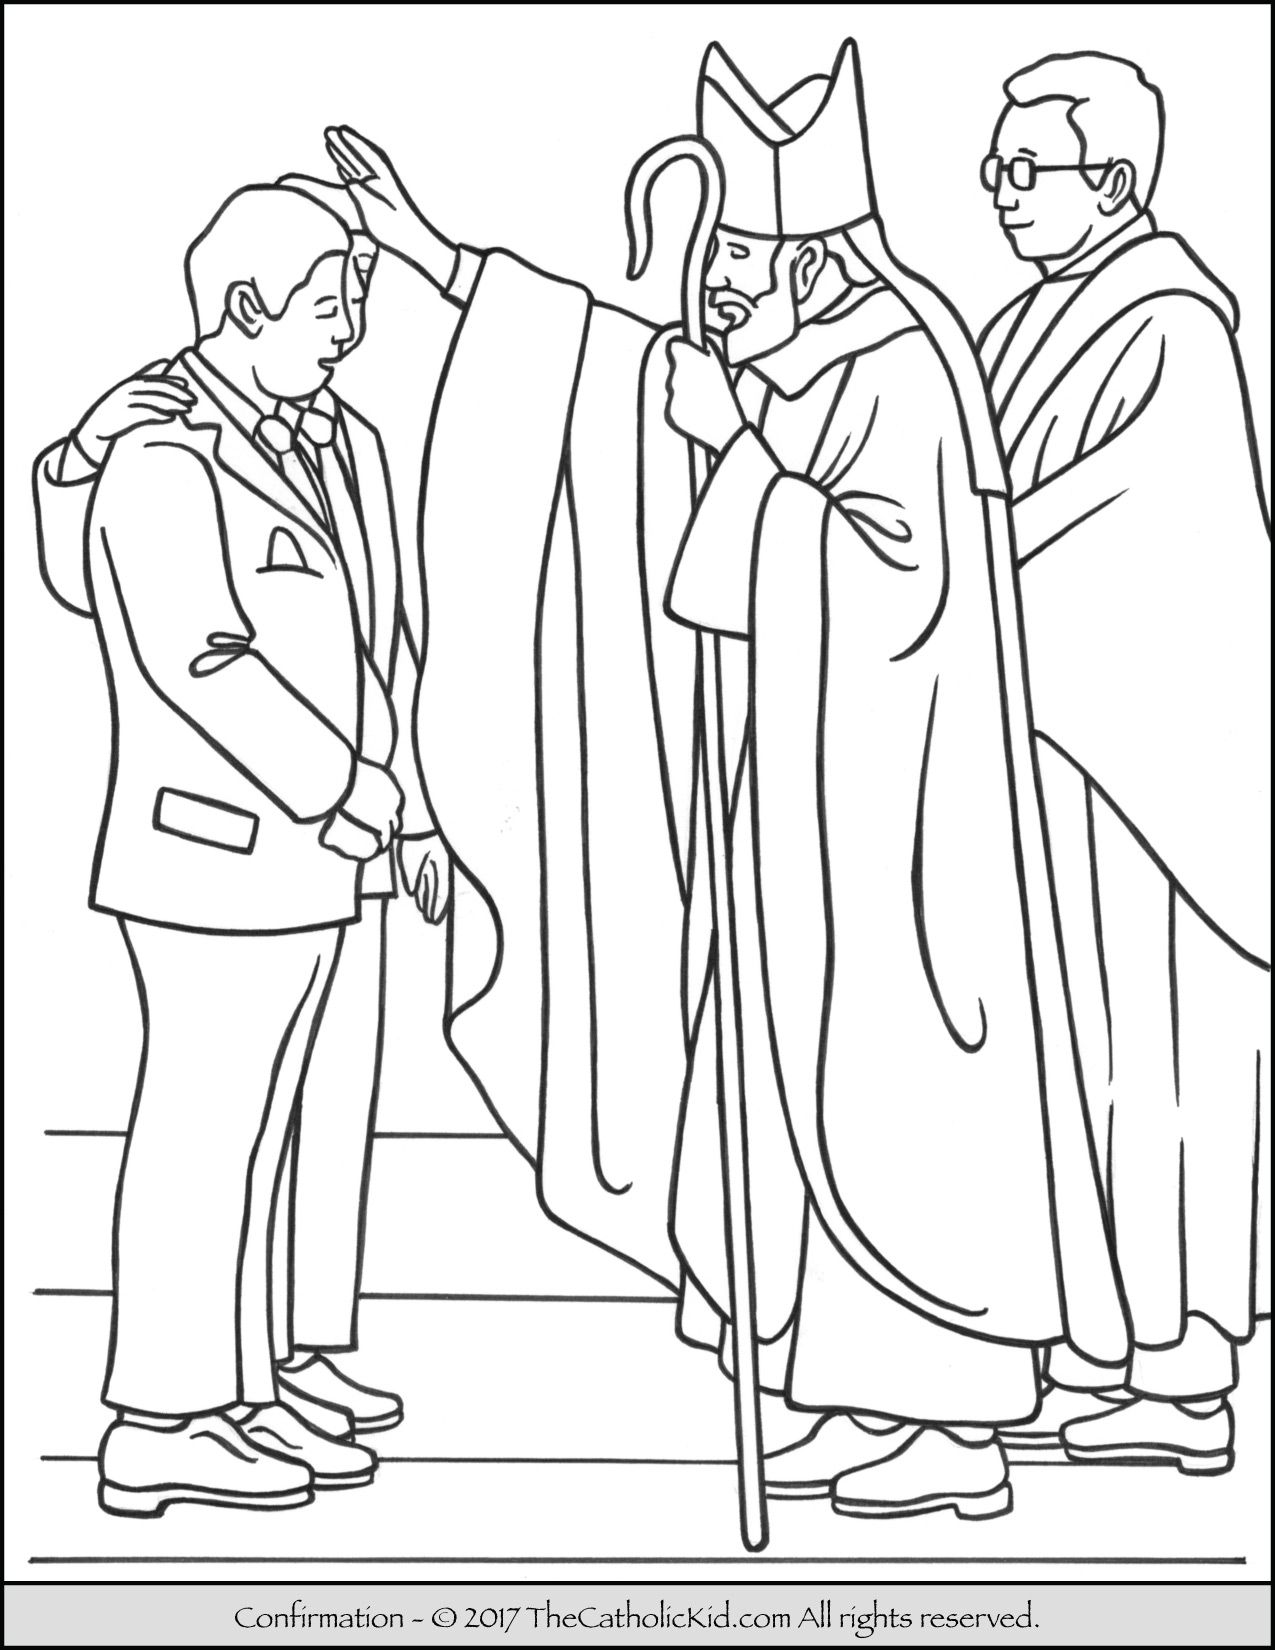 Sacrament of Confirmation Coloring Page. | Catholic coloring ...